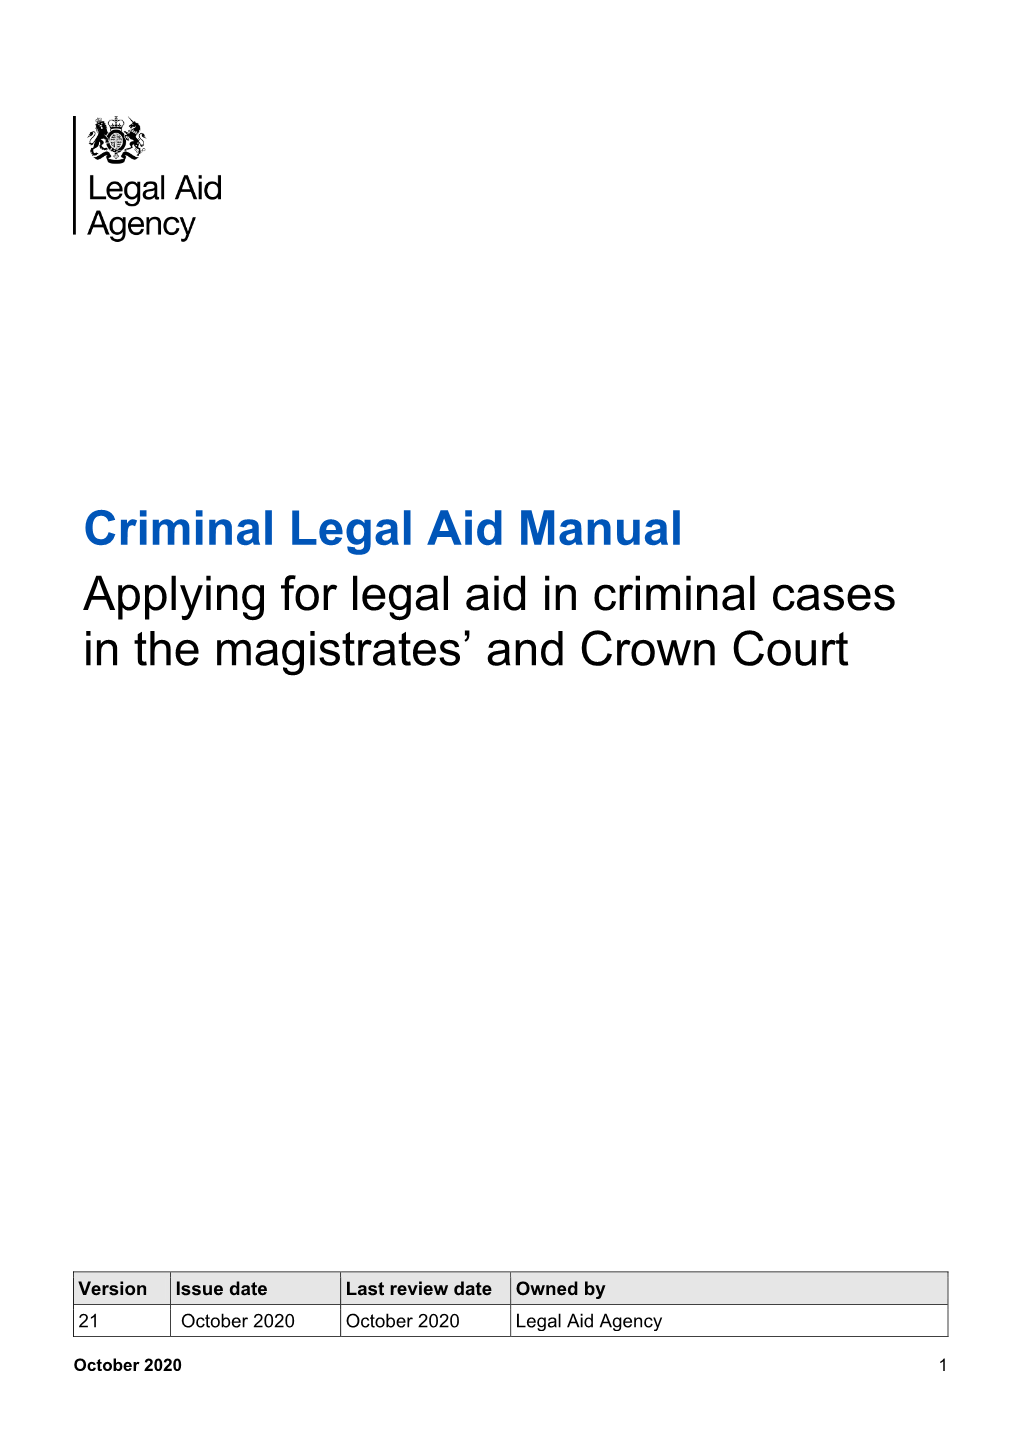 Criminal Legal Aid Manual Applying for Legal Aid in Criminal Cases in the Magistrates’ and Crown Court